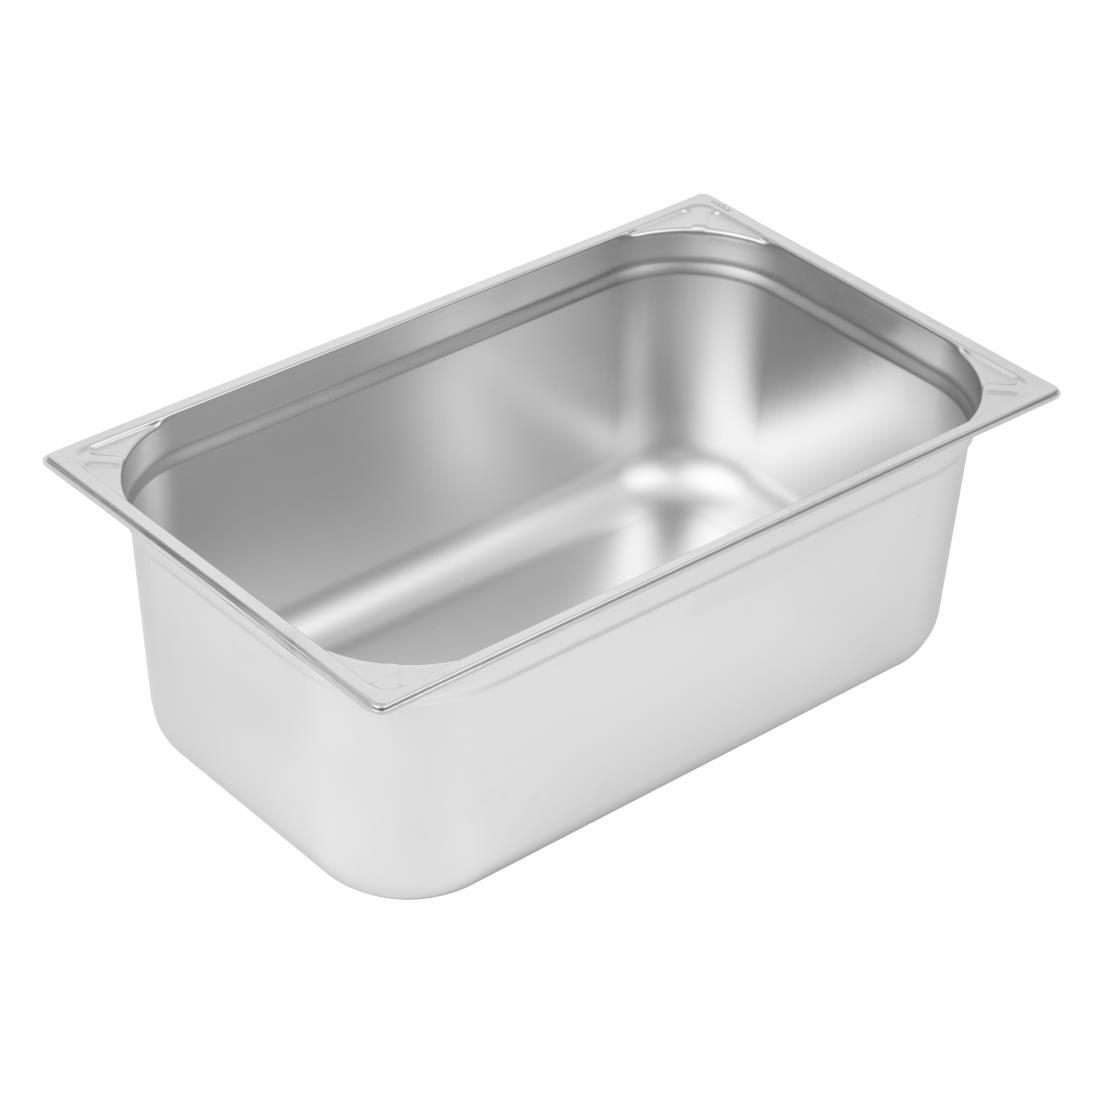 Vogue Heavy Duty Stainless Steel 1/1 Gastronorm Pan 200mm - DW436  - 1